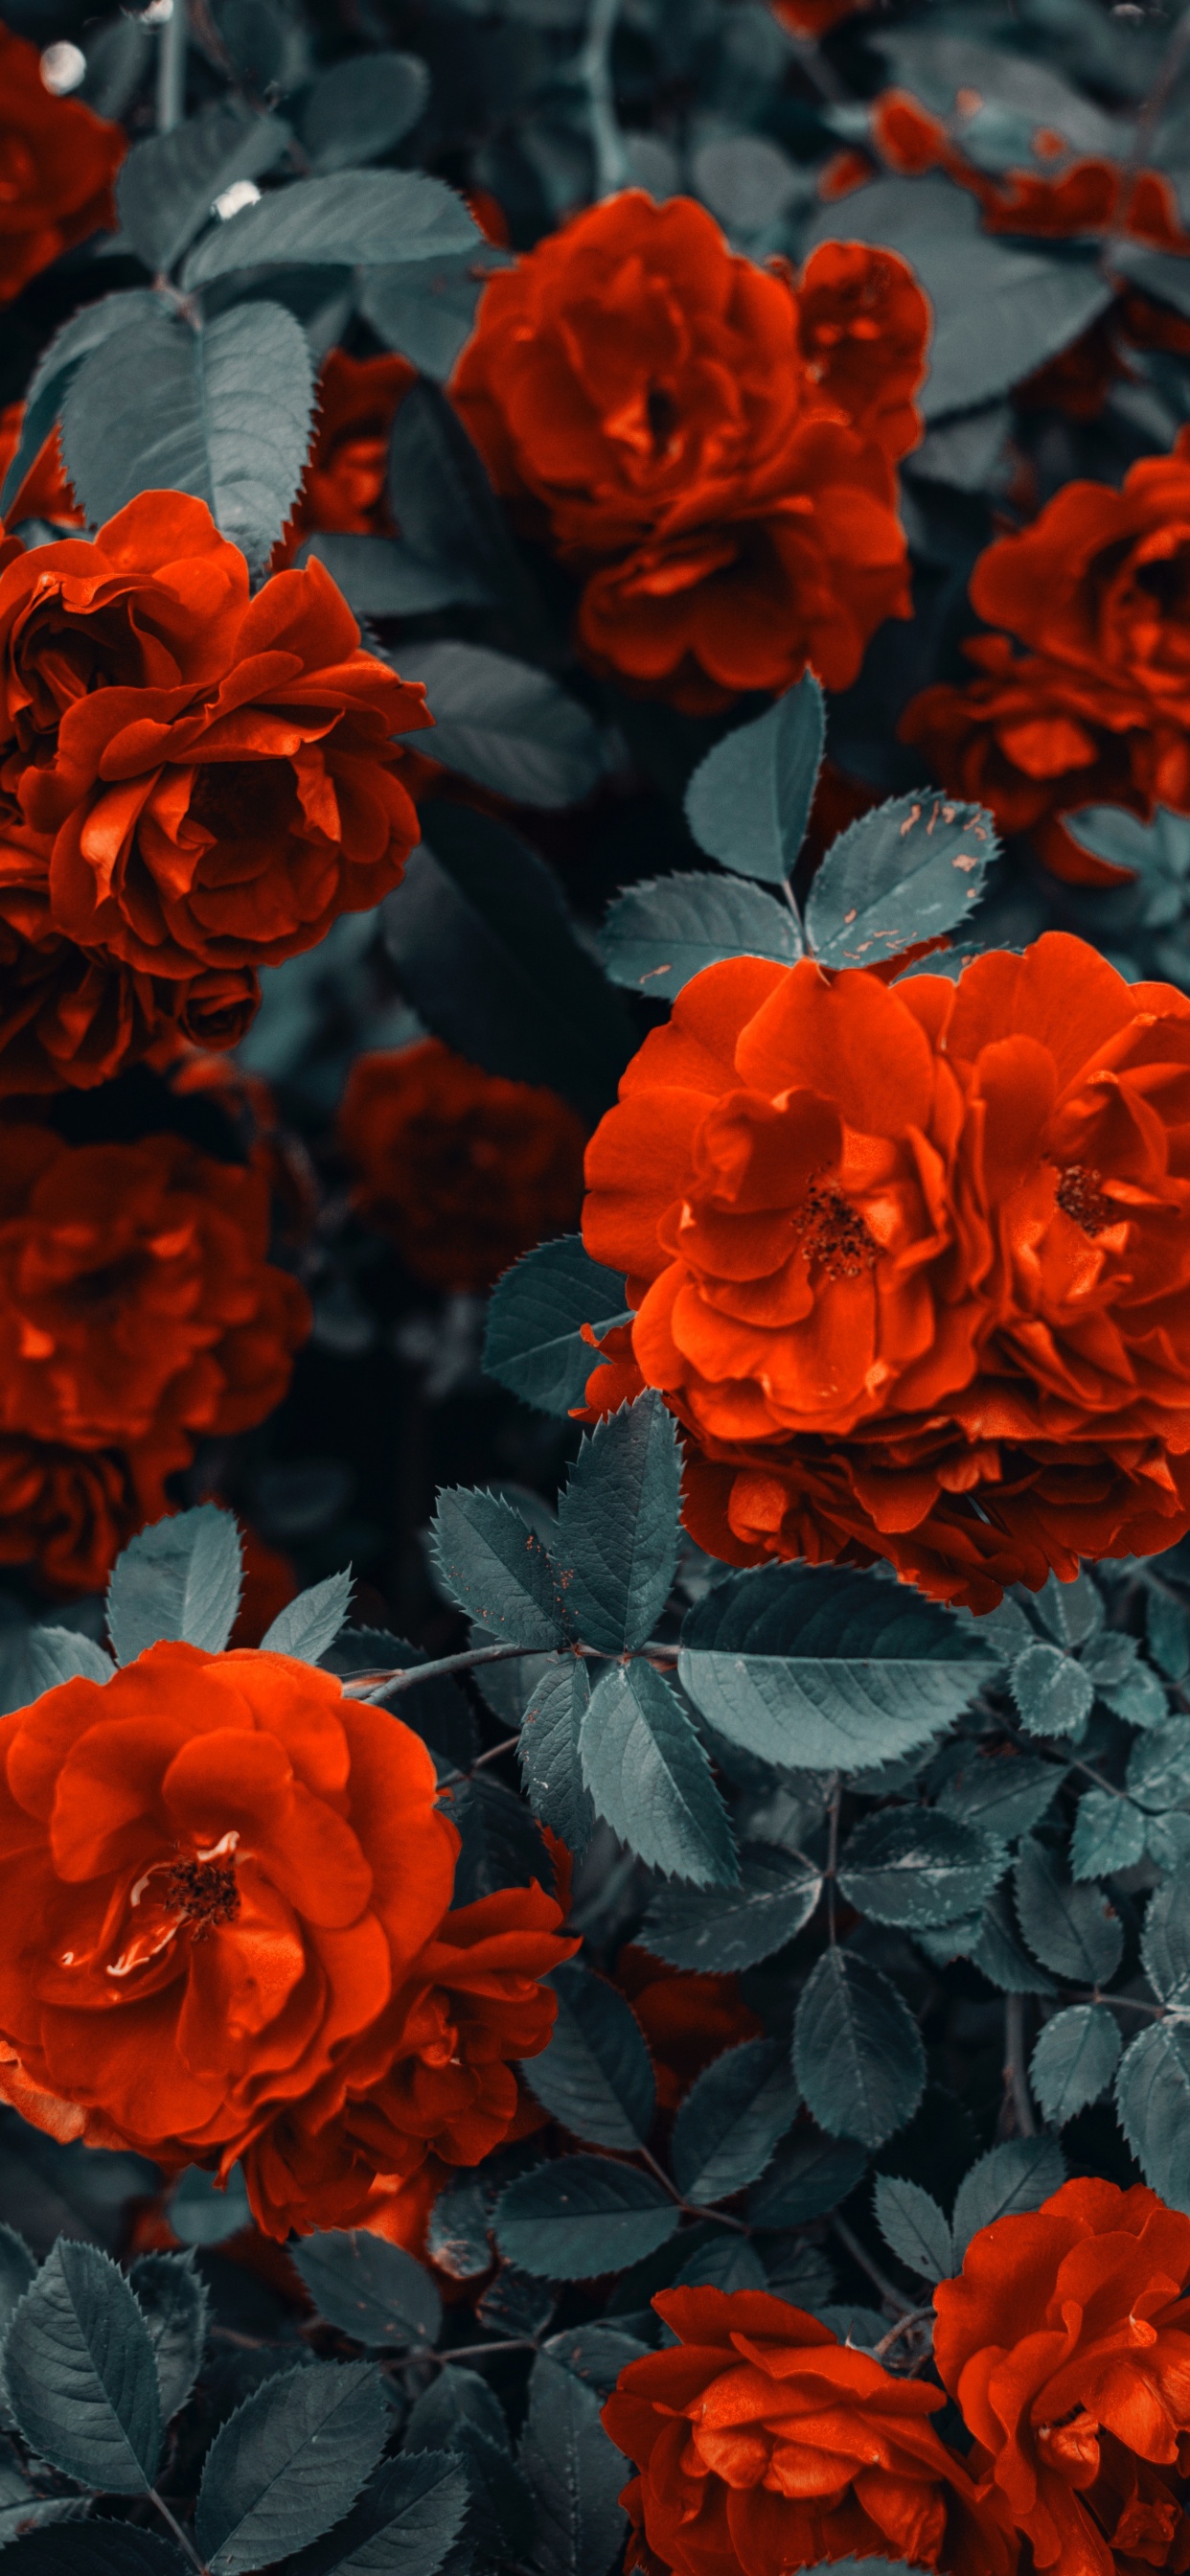 Red Flowers With Green Leaves. Wallpaper in 1242x2688 Resolution